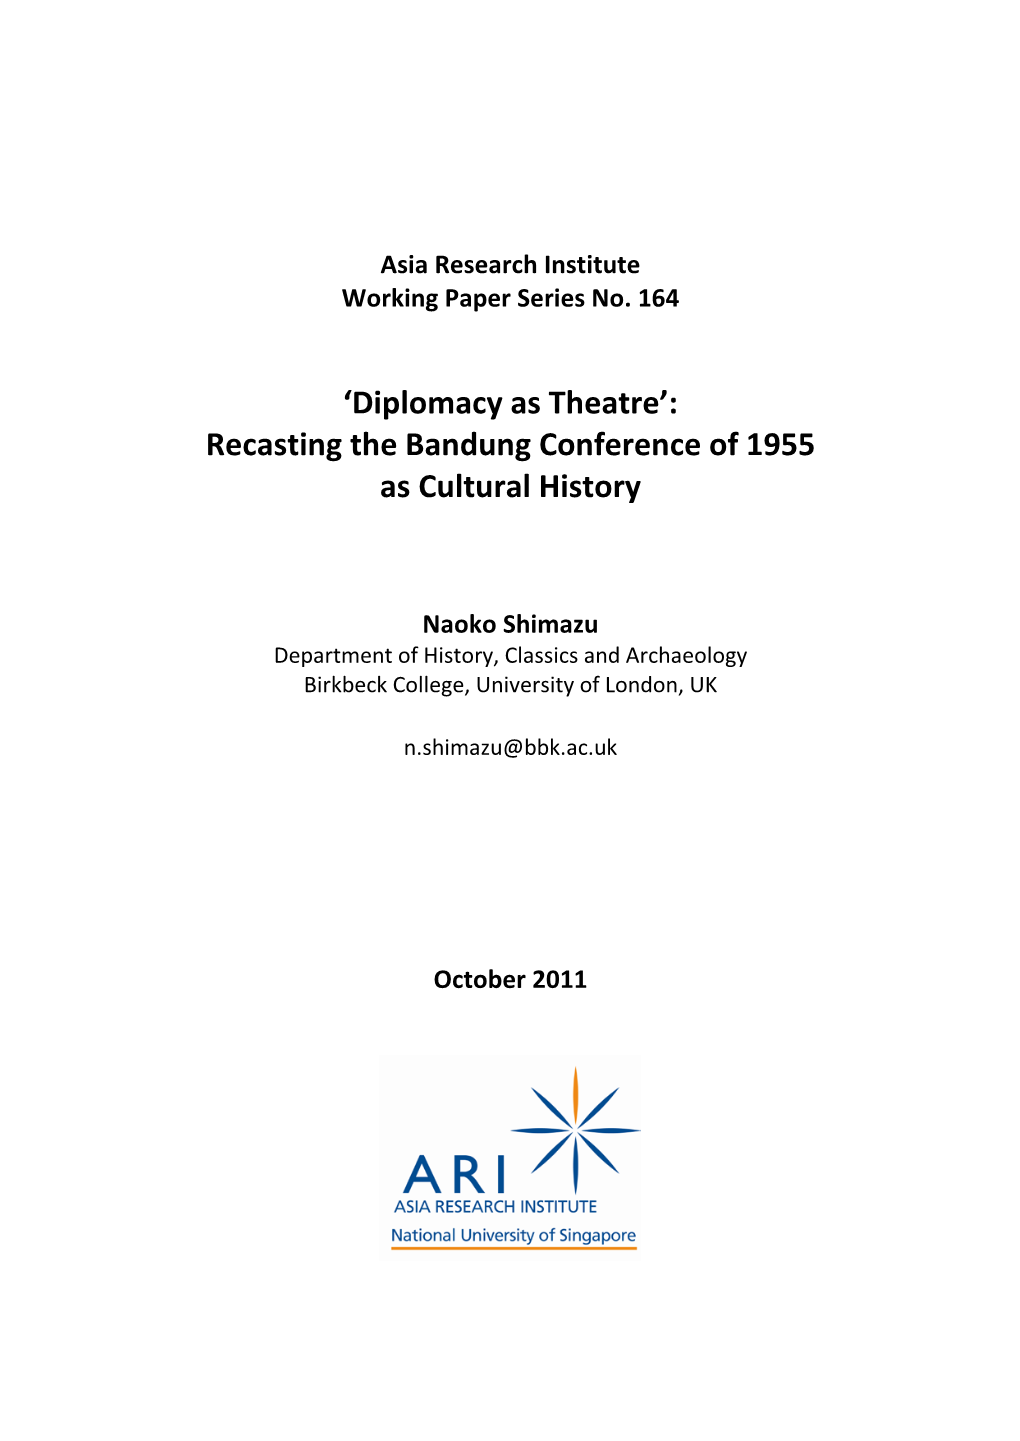 'Diplomacy As Theatre': Recasting the Bandung Conference of 1955 As